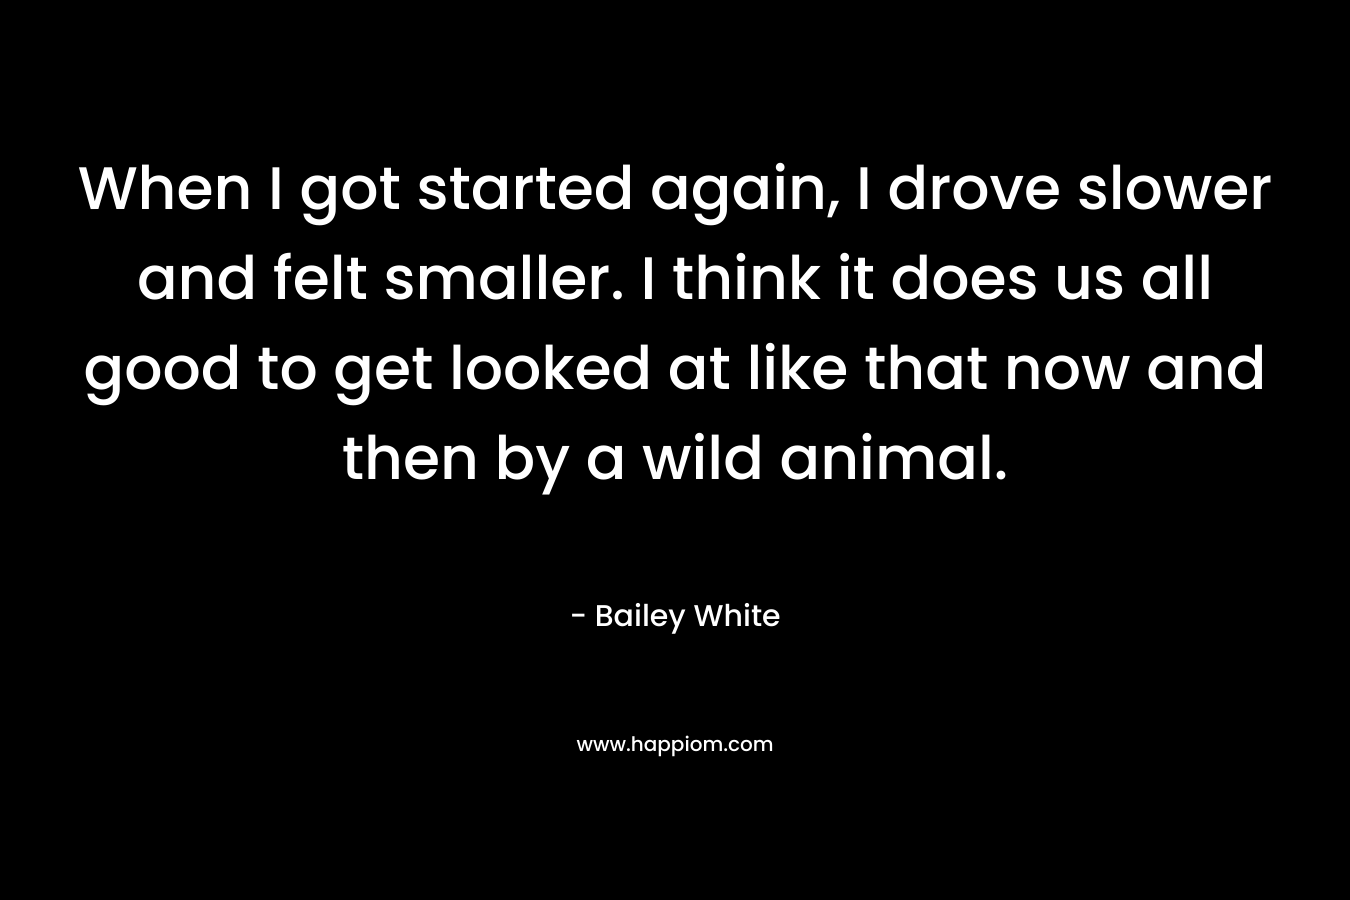 When I got started again, I drove slower and felt smaller. I think it does us all good to get looked at like that now and then by a wild animal. – Bailey White